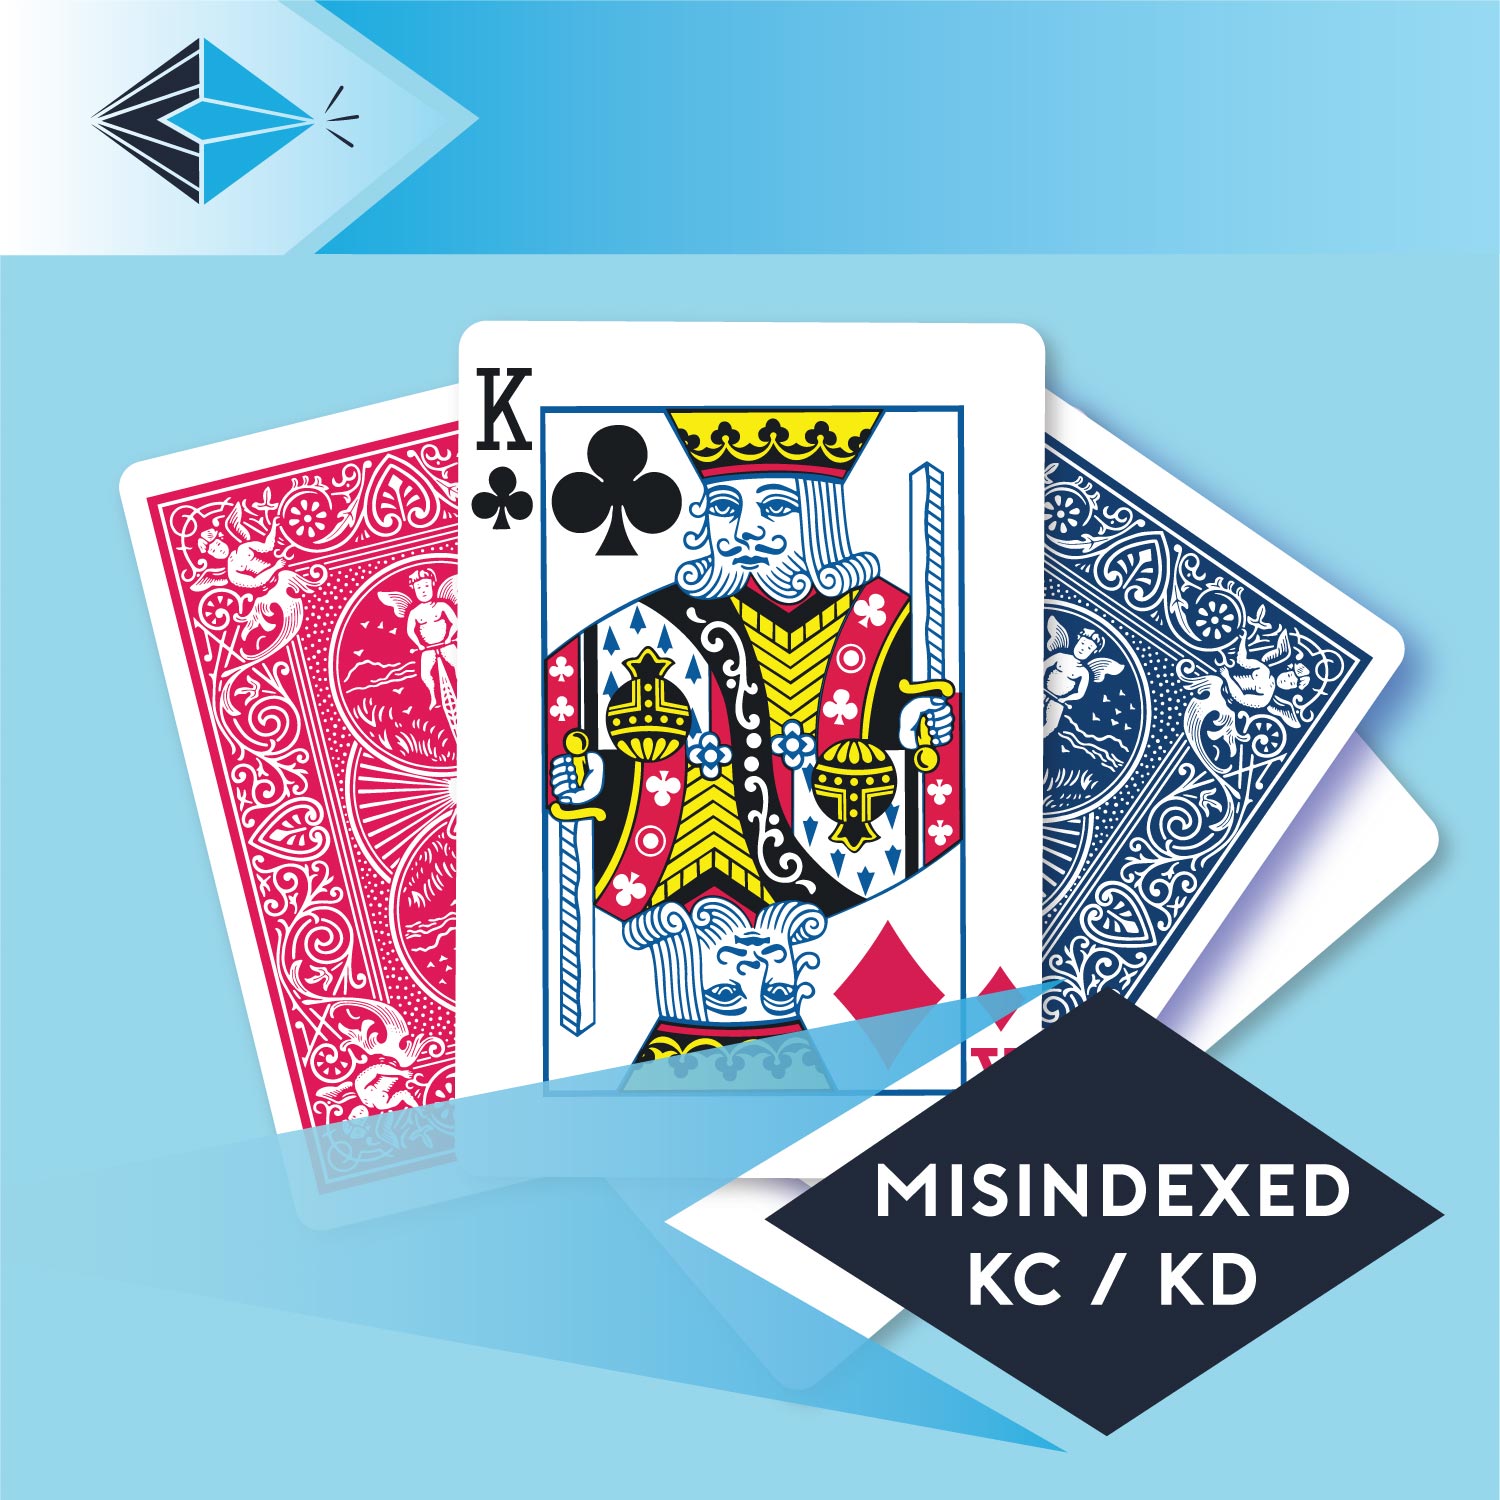 mis-indexed-king-clubs-diamonds-kc-kd-playing card for magicians printing printers Stockport Manchester UK